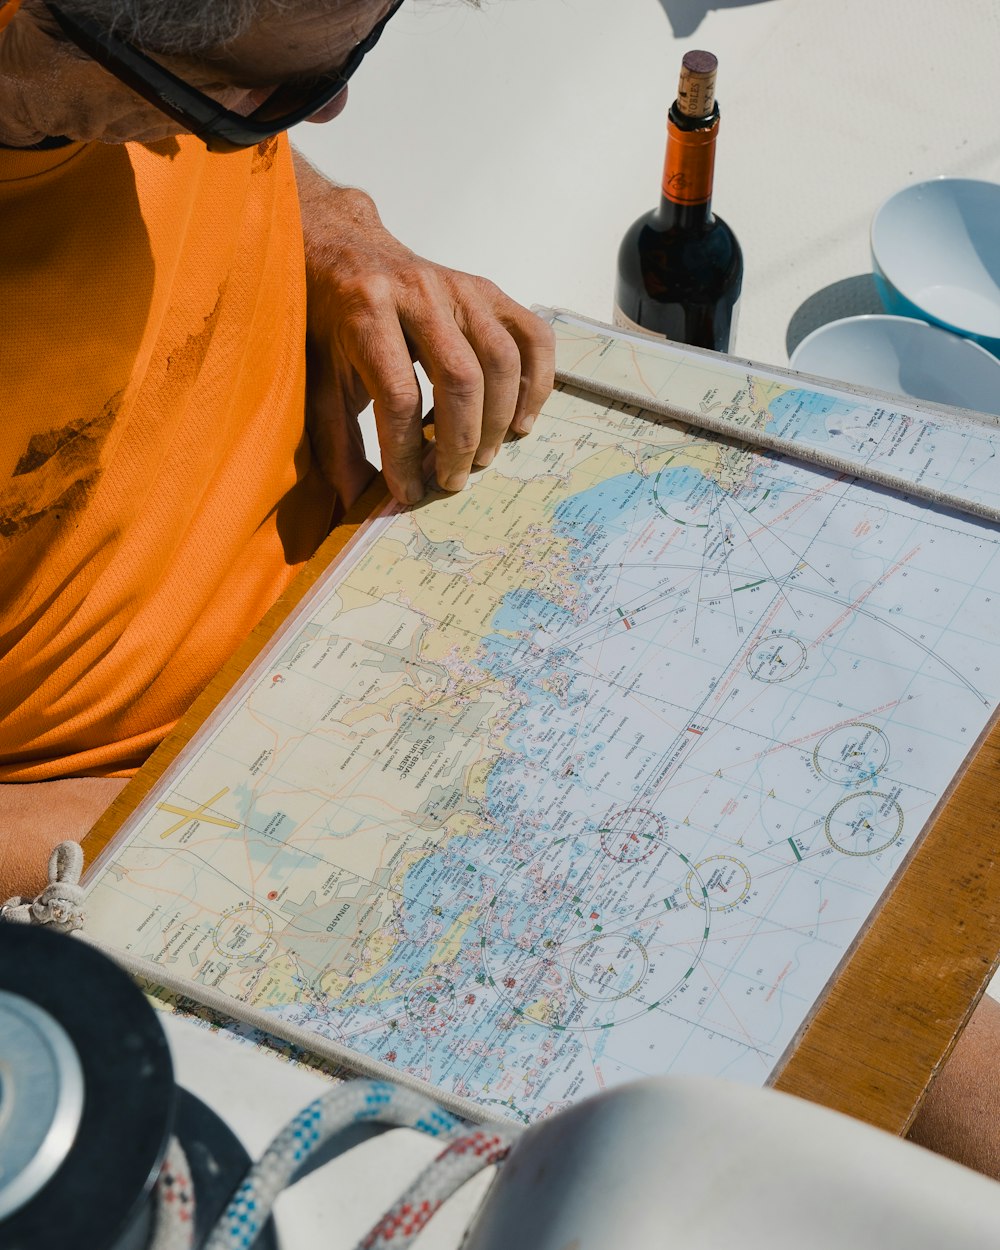 a man in an orange shirt is looking at a map